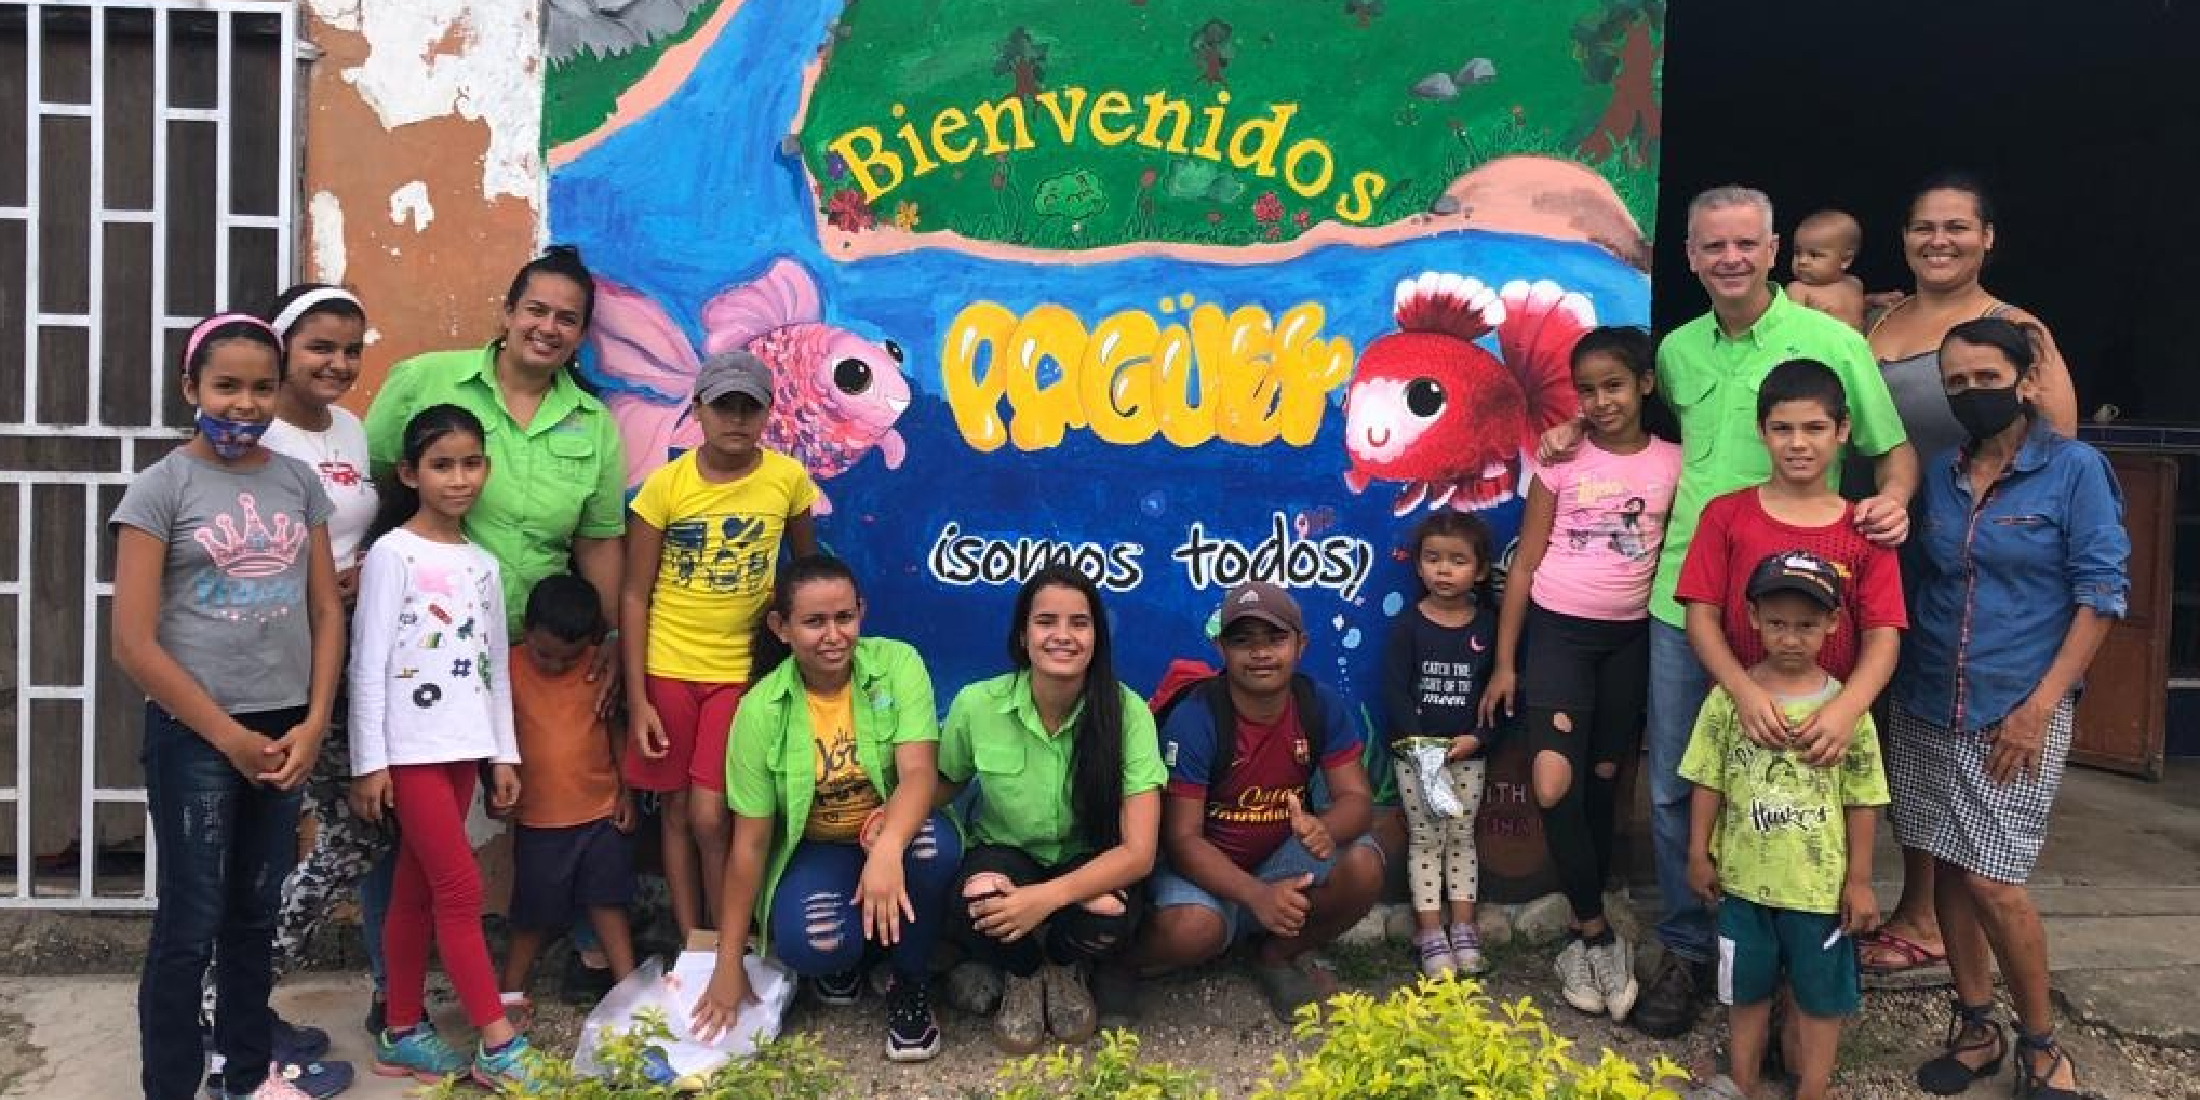 Supporting education and underprivileged girls in Venezuela